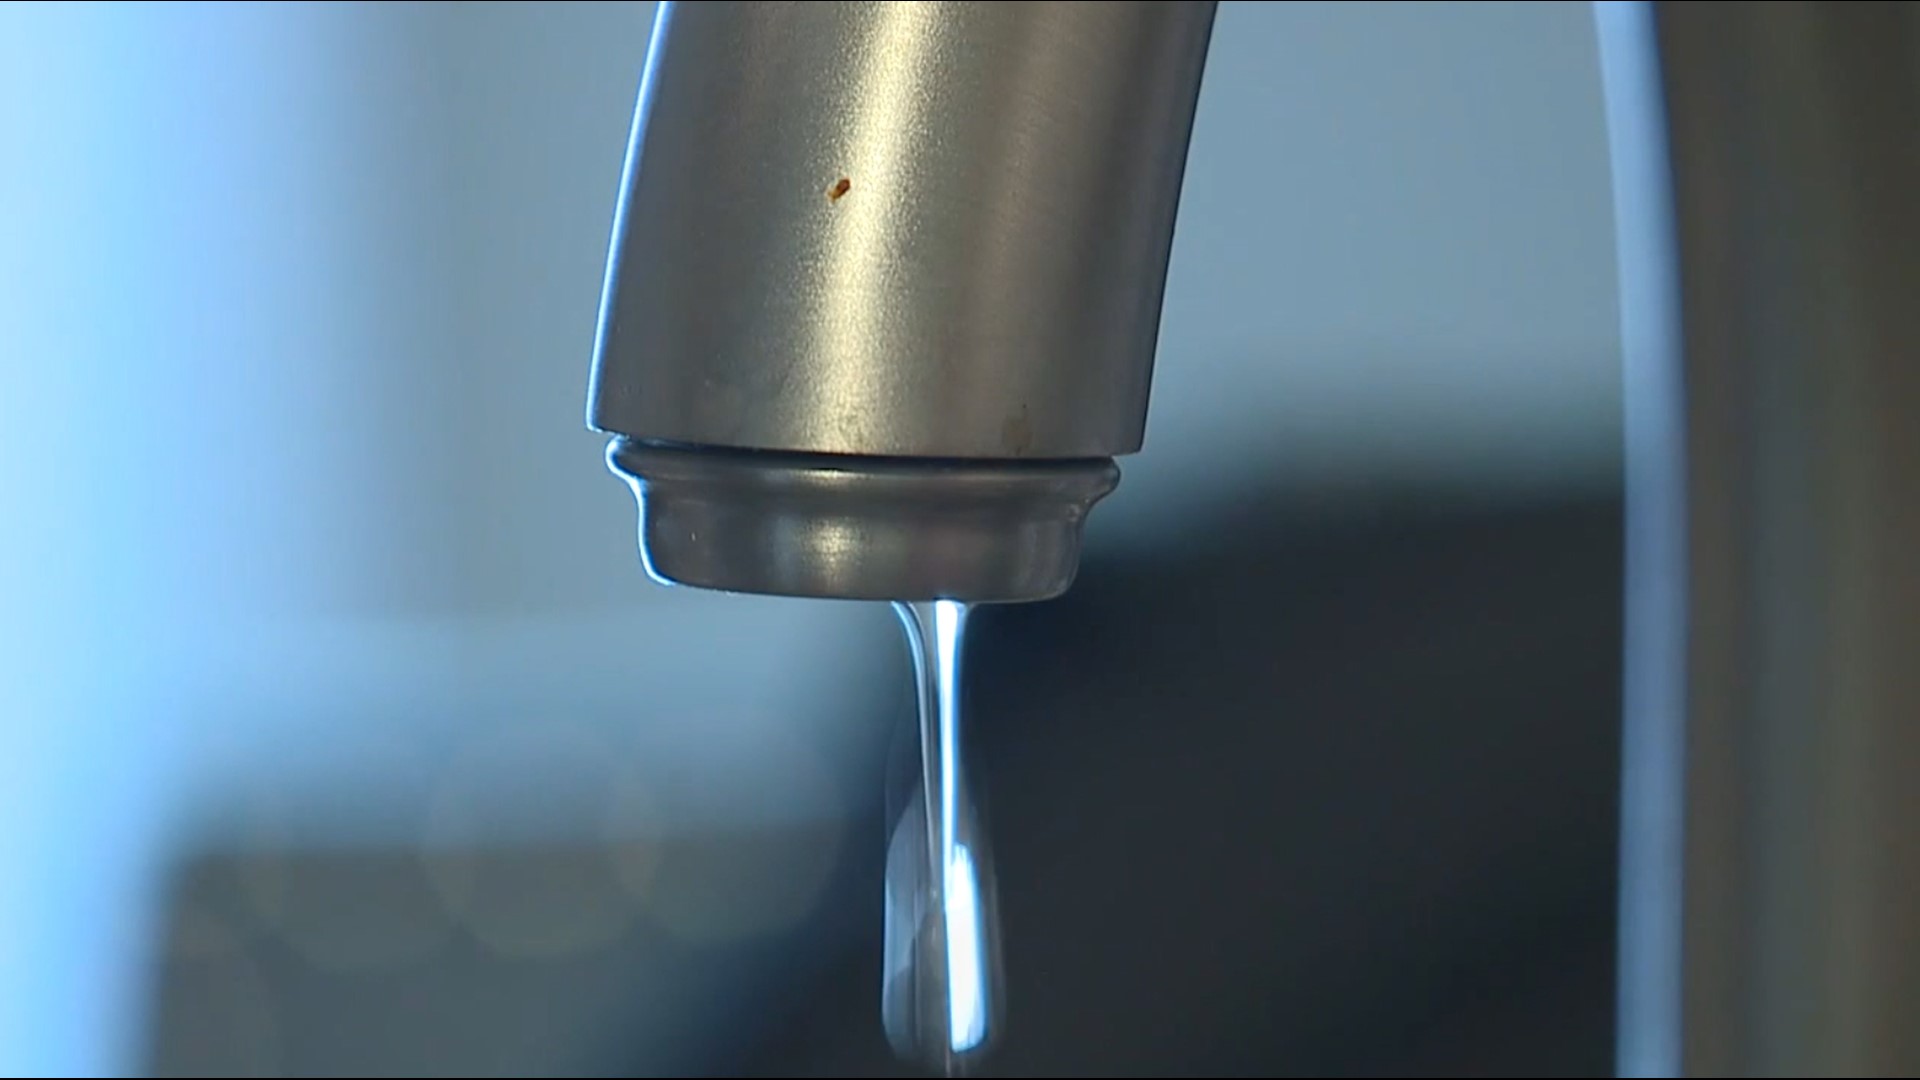 The Pennsylvania Department of Environmental Protection set new caps on two types of PFAS, also known as “forever chemicals,” in drinking water.